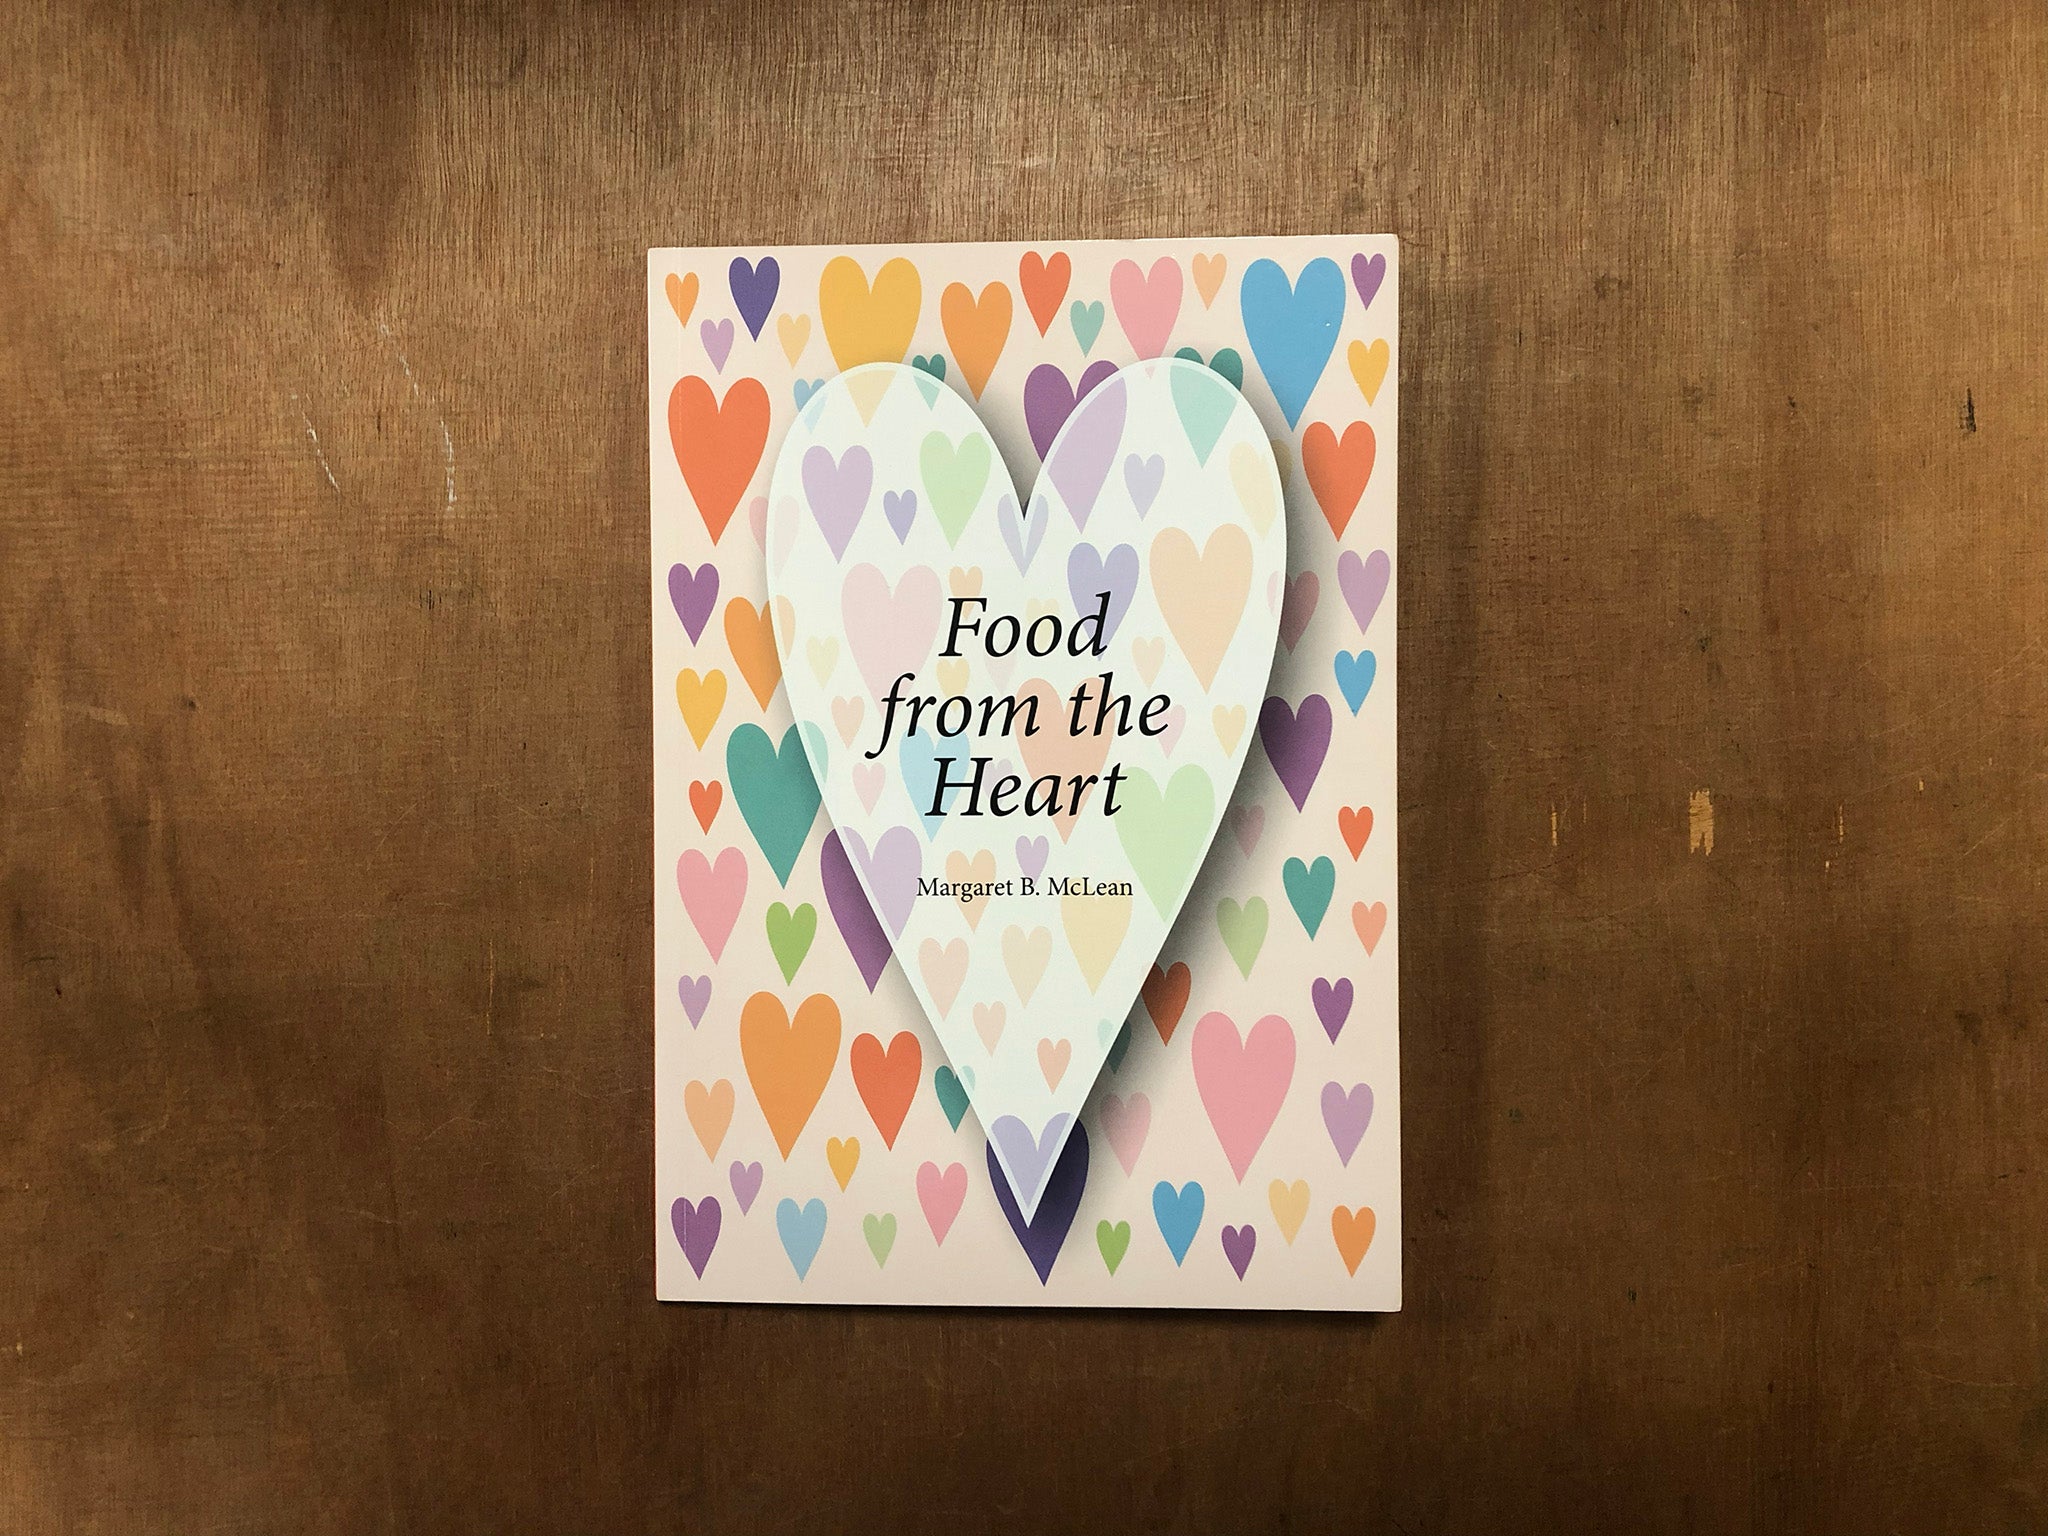 FOOD FROM THE HEART by Margaret B. McLean